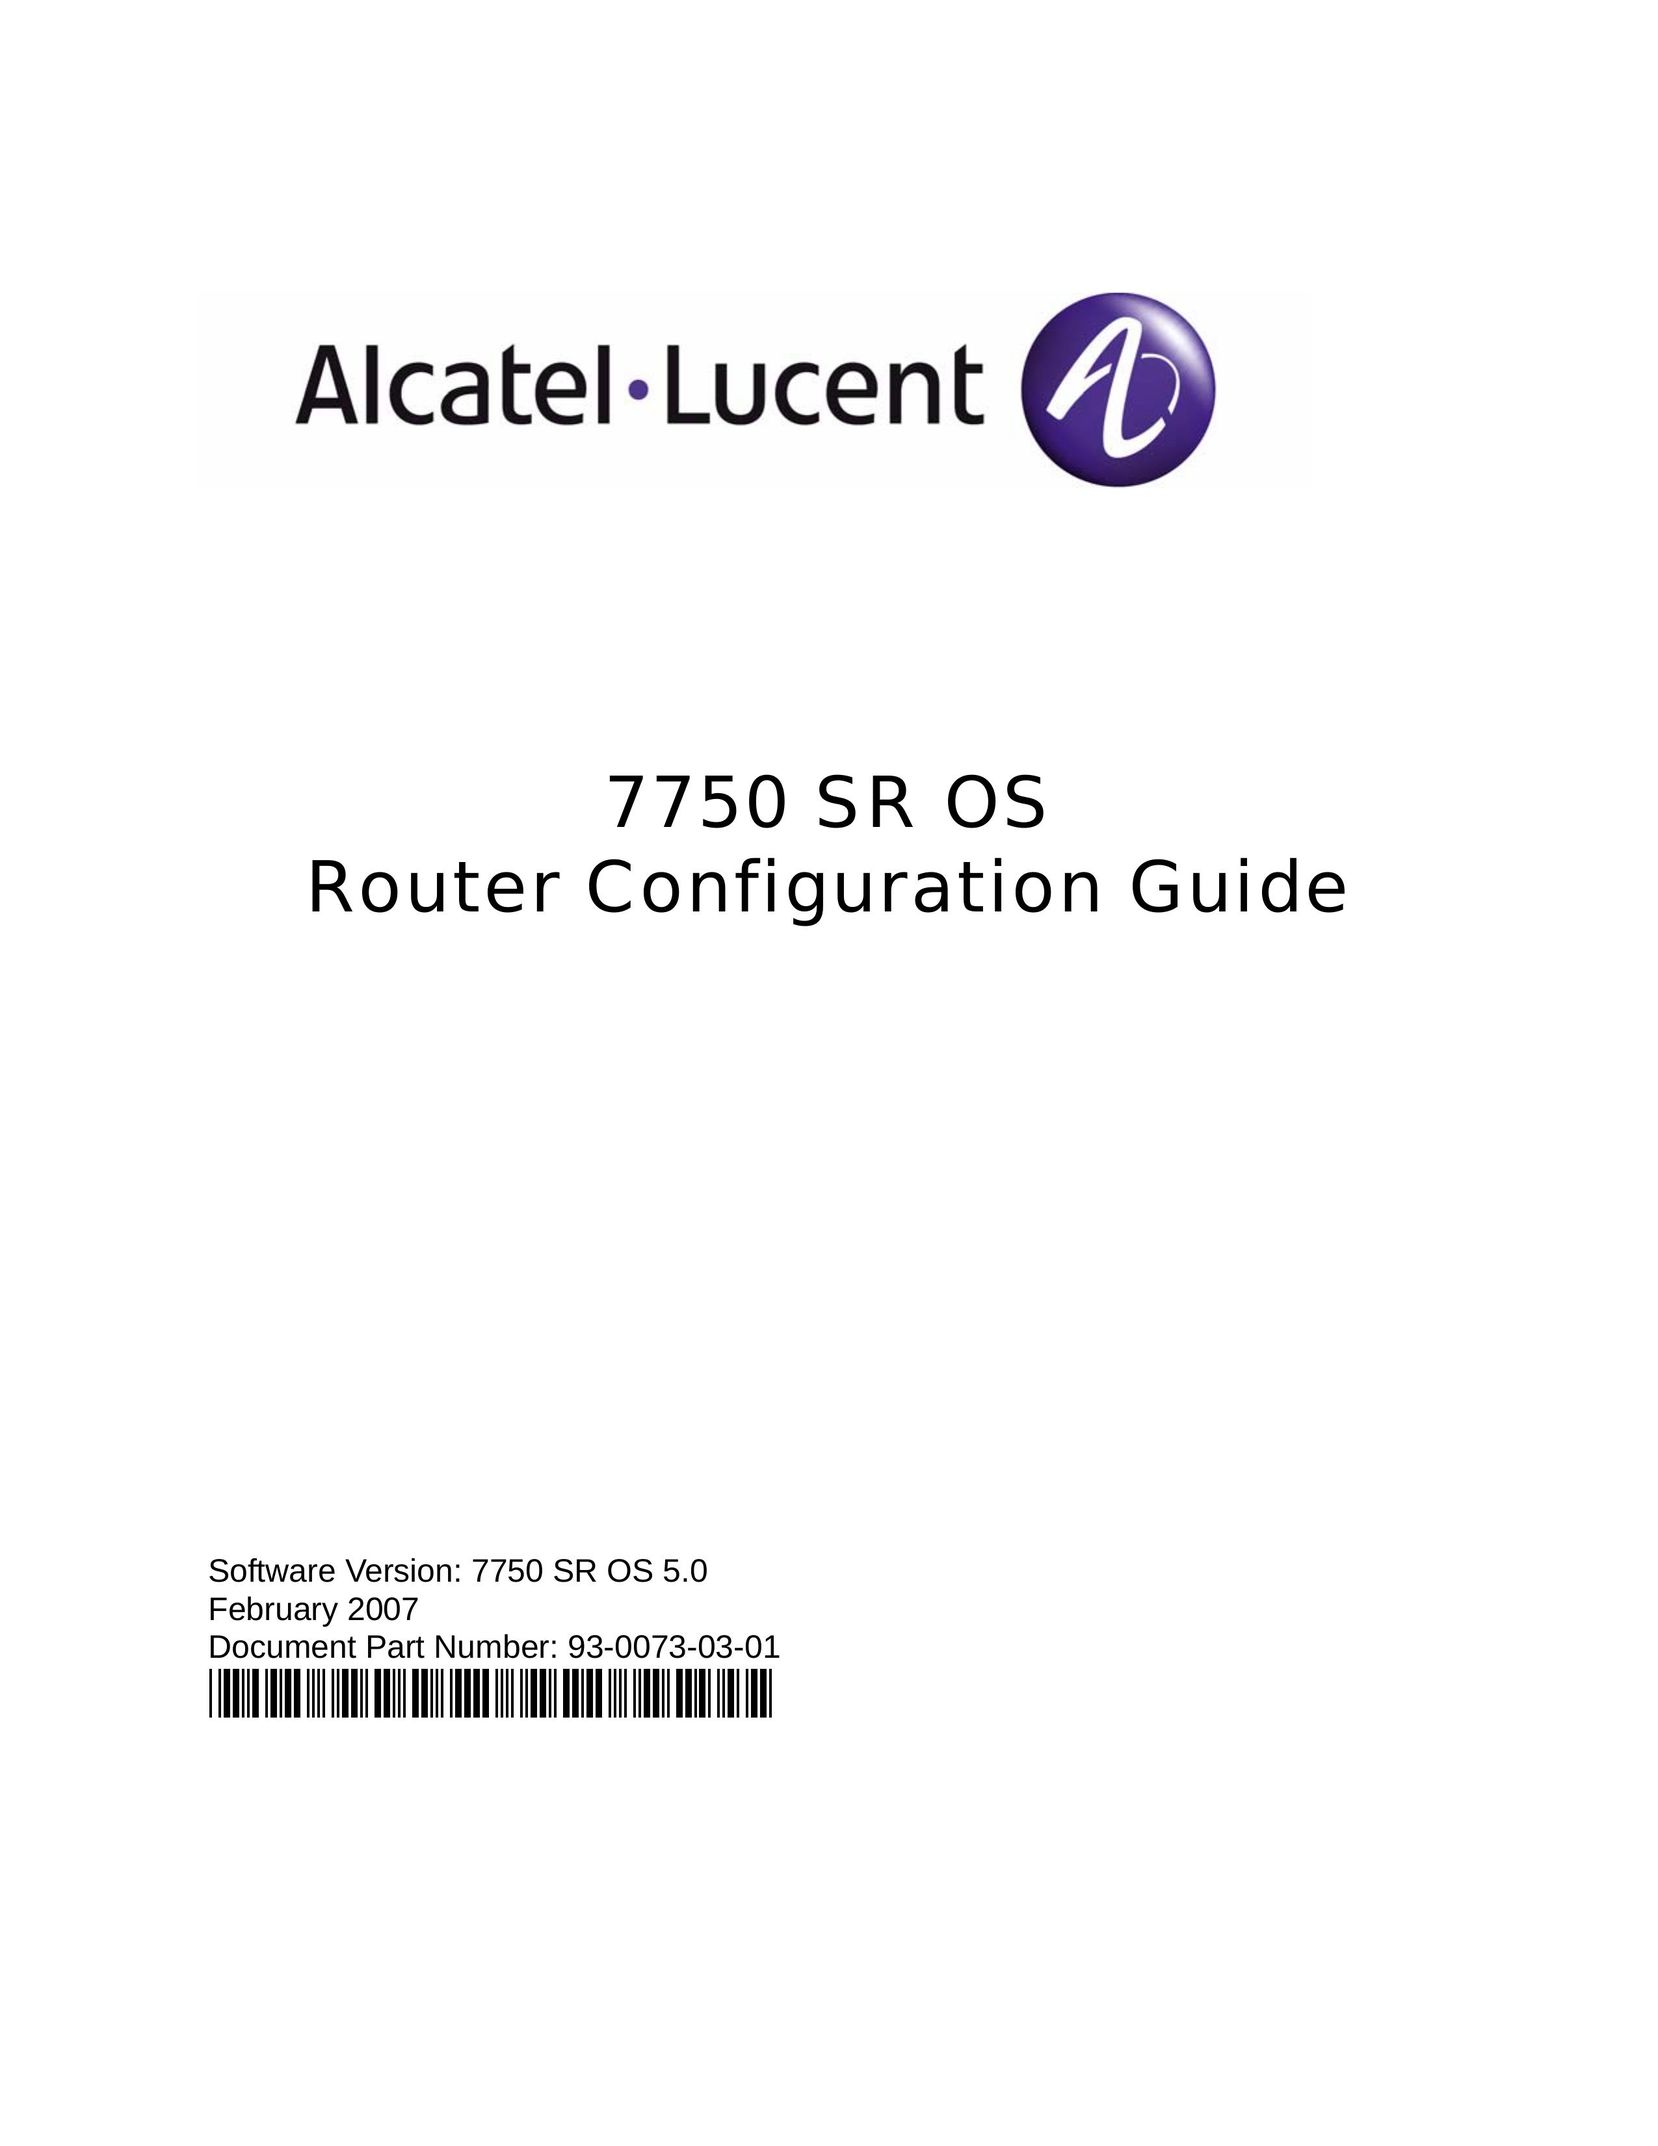 Alcatel-Lucent 7750 SR OS Network Router User Manual